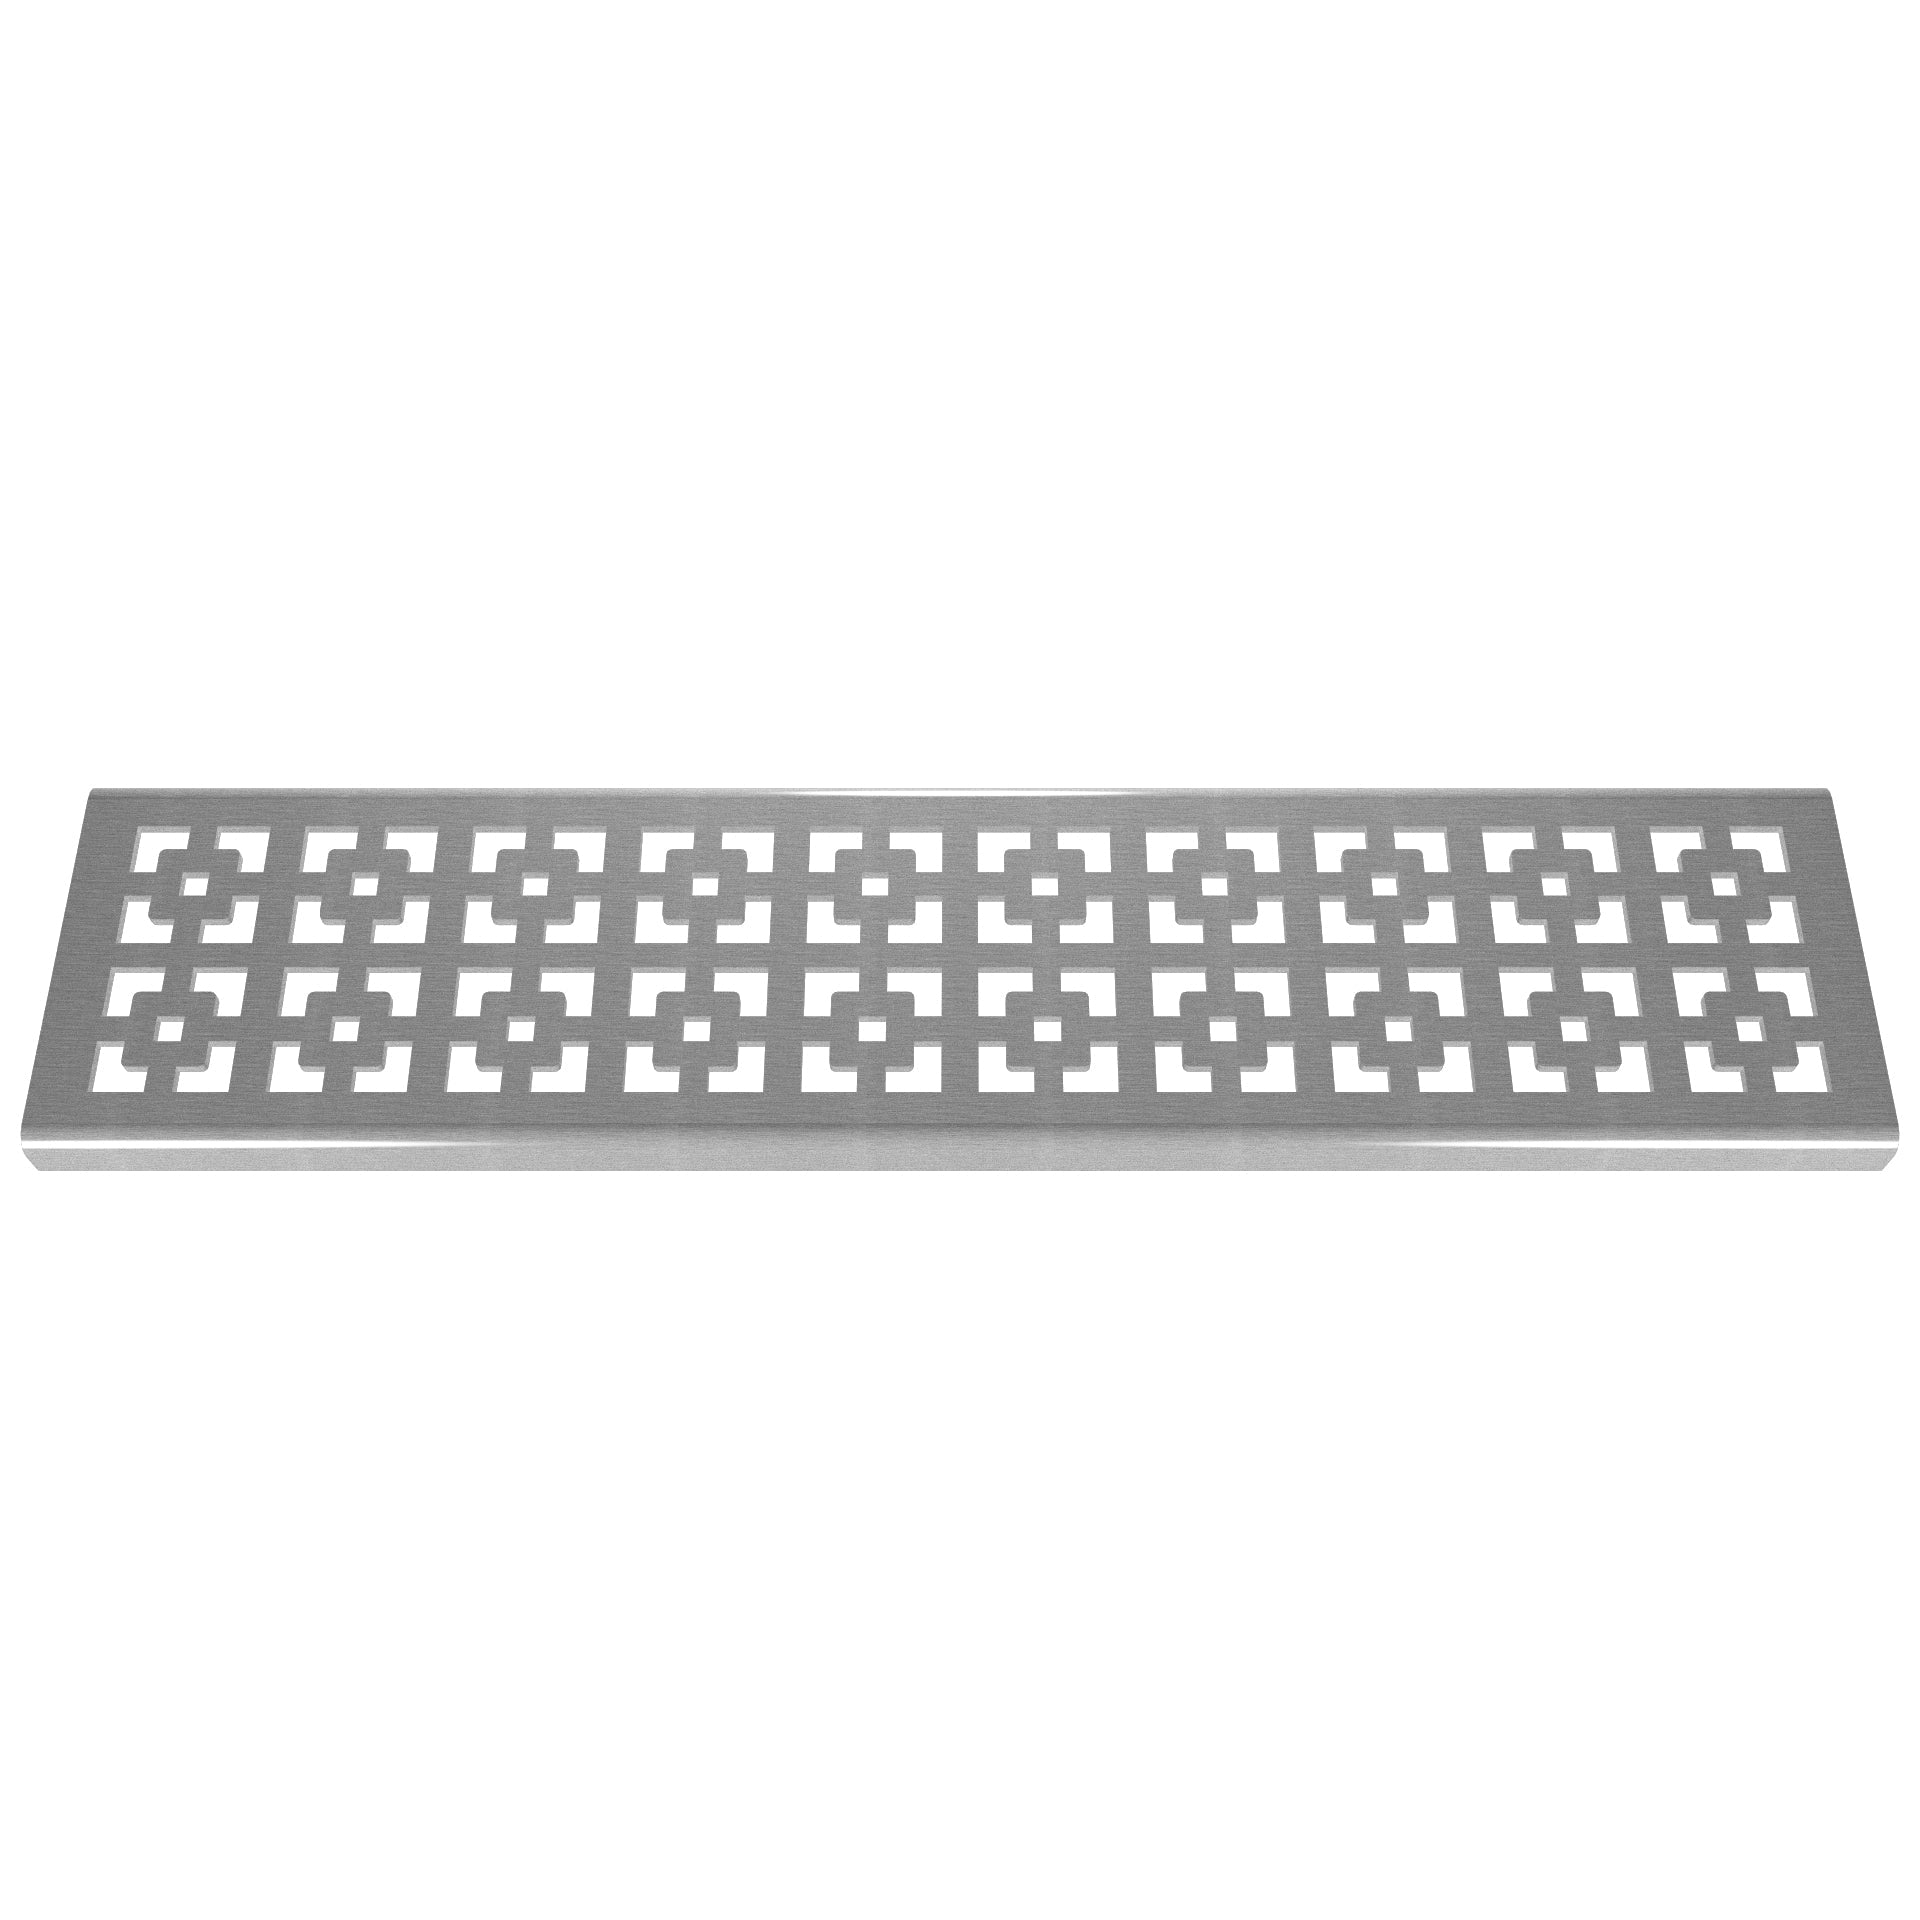 [SALE ITEM] Geo Squares 304 Stainless Steel Channel Drain Grate 75 x 913mm (3 Inch)